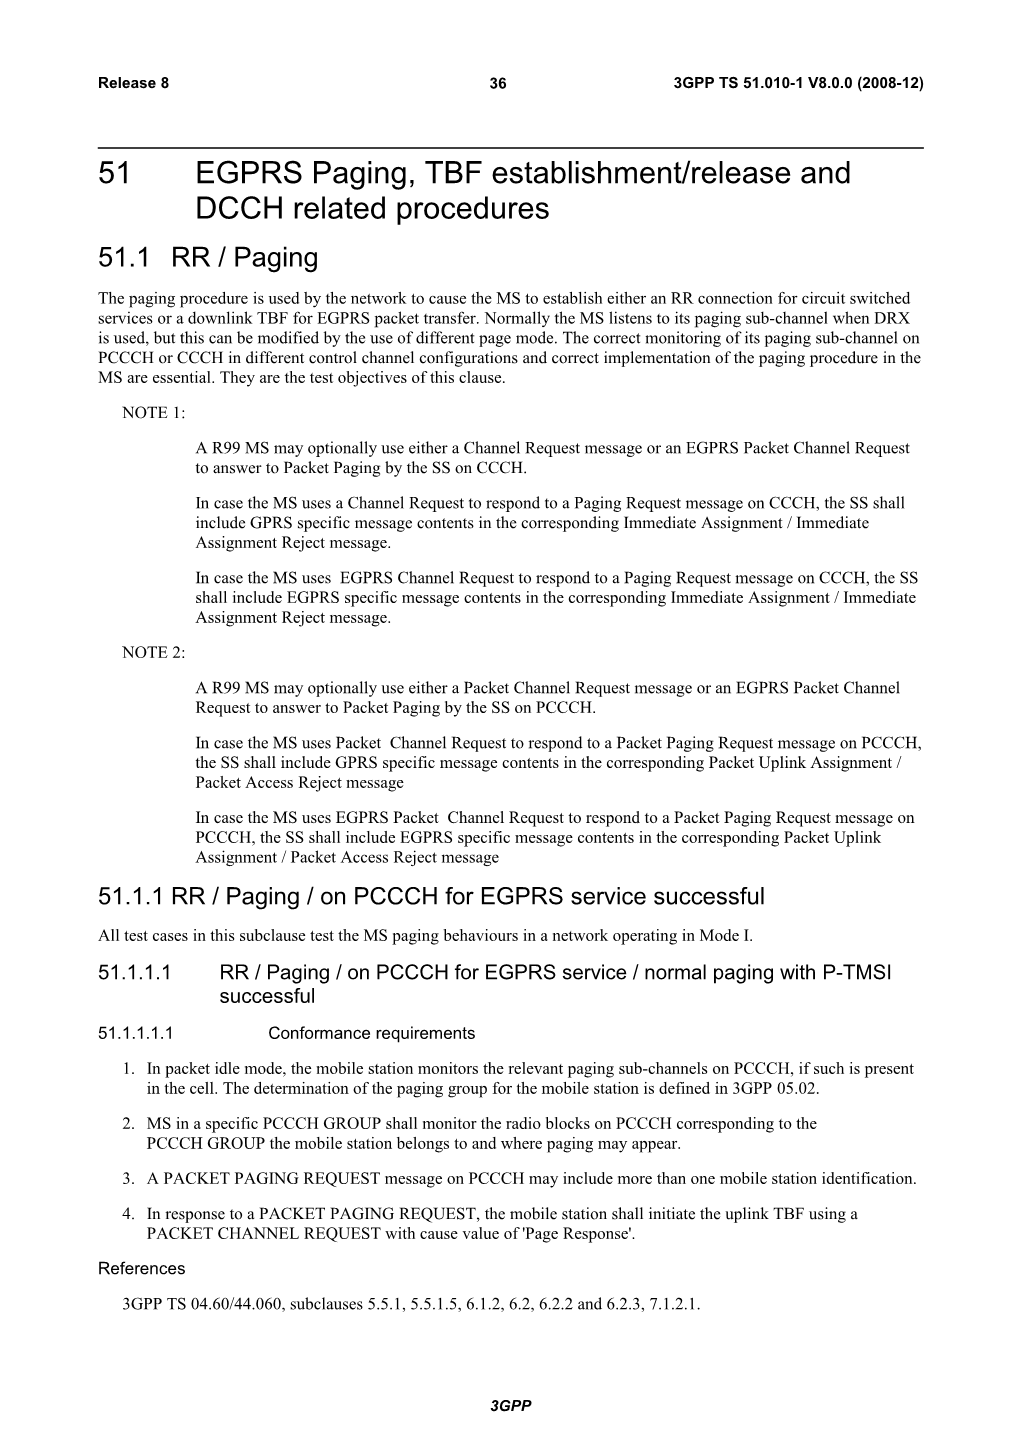 51EGPRS Paging, TBF Establishment/Release and DCCH Related Procedures